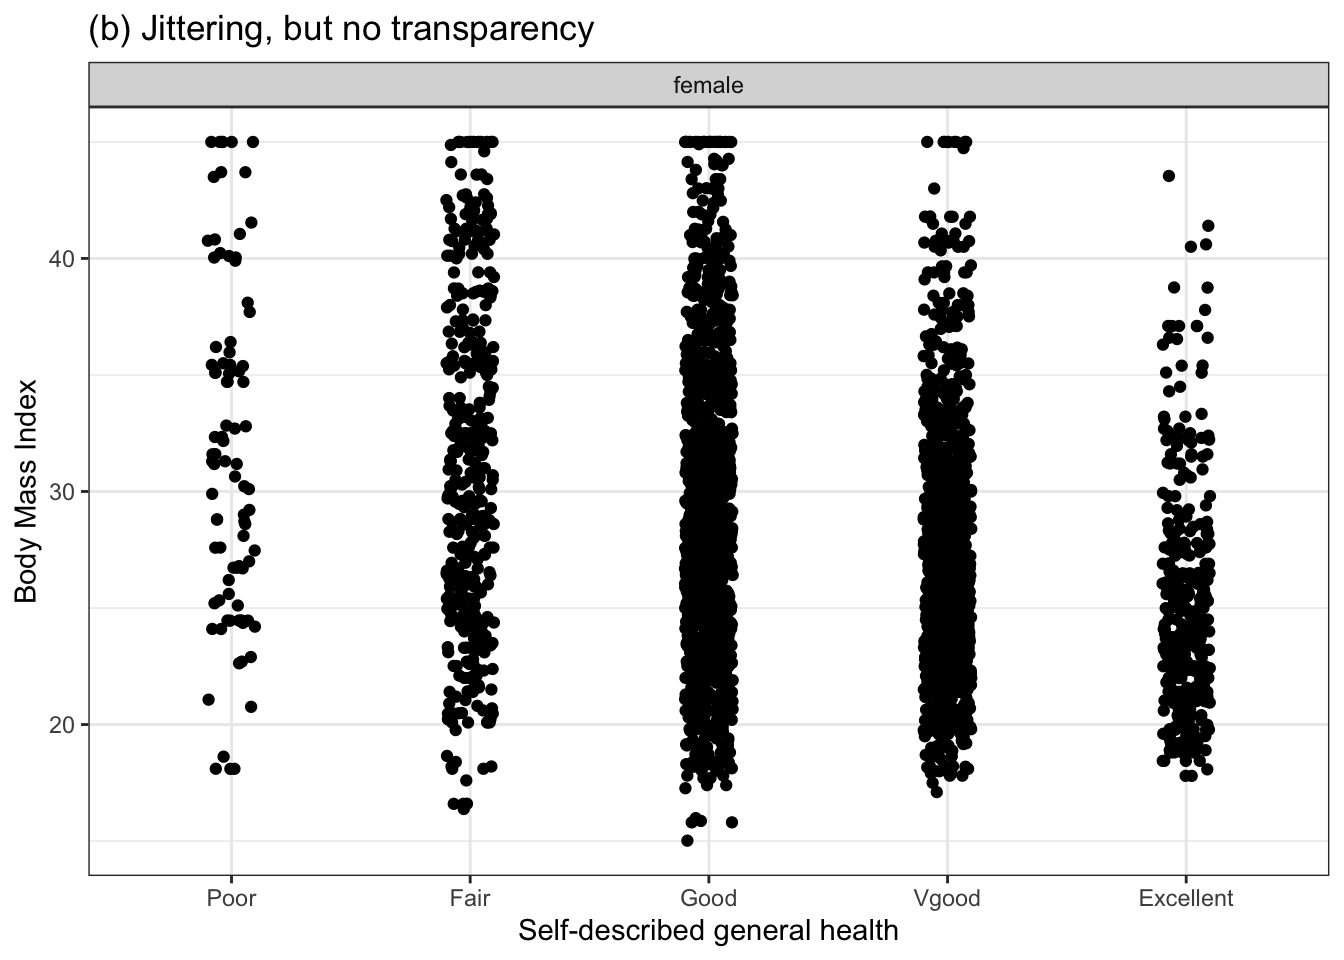 BMI versus general health data displayed without jittering (a), with jittering (b), and with both jittering and transparency (c).